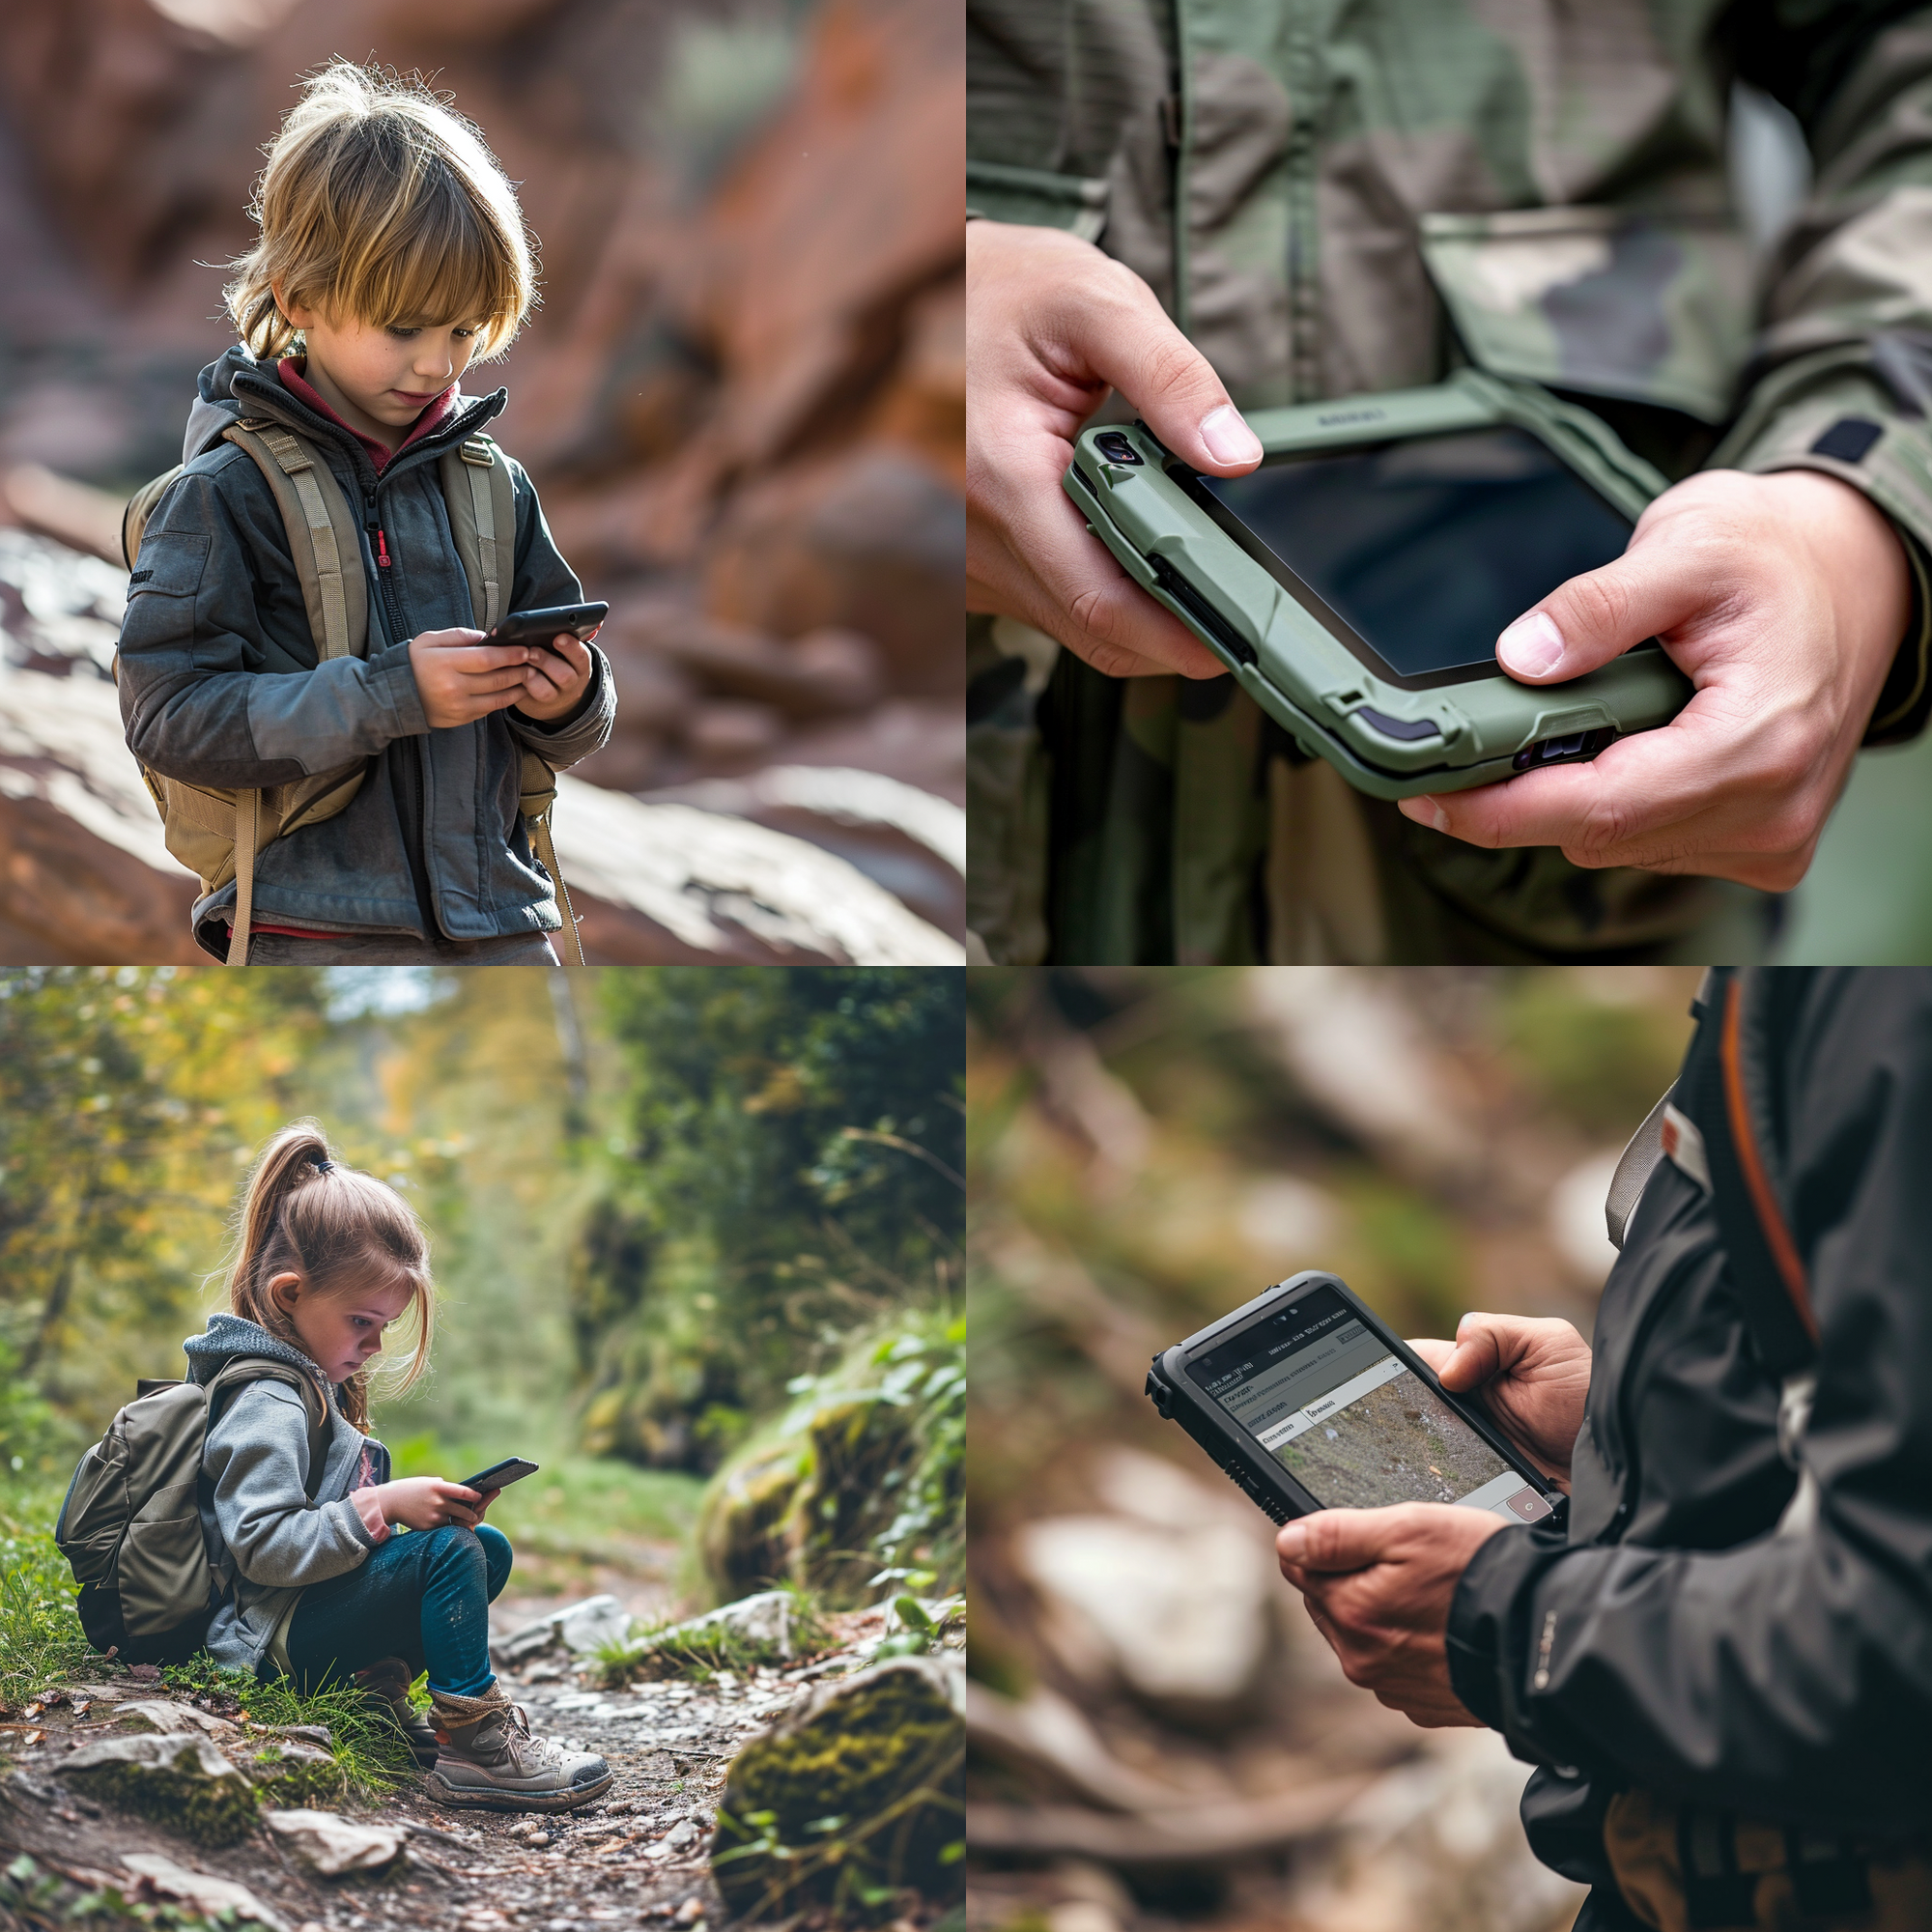 AGM Mobile's Rugged Devices: Enhancing Education in Challenging Environments